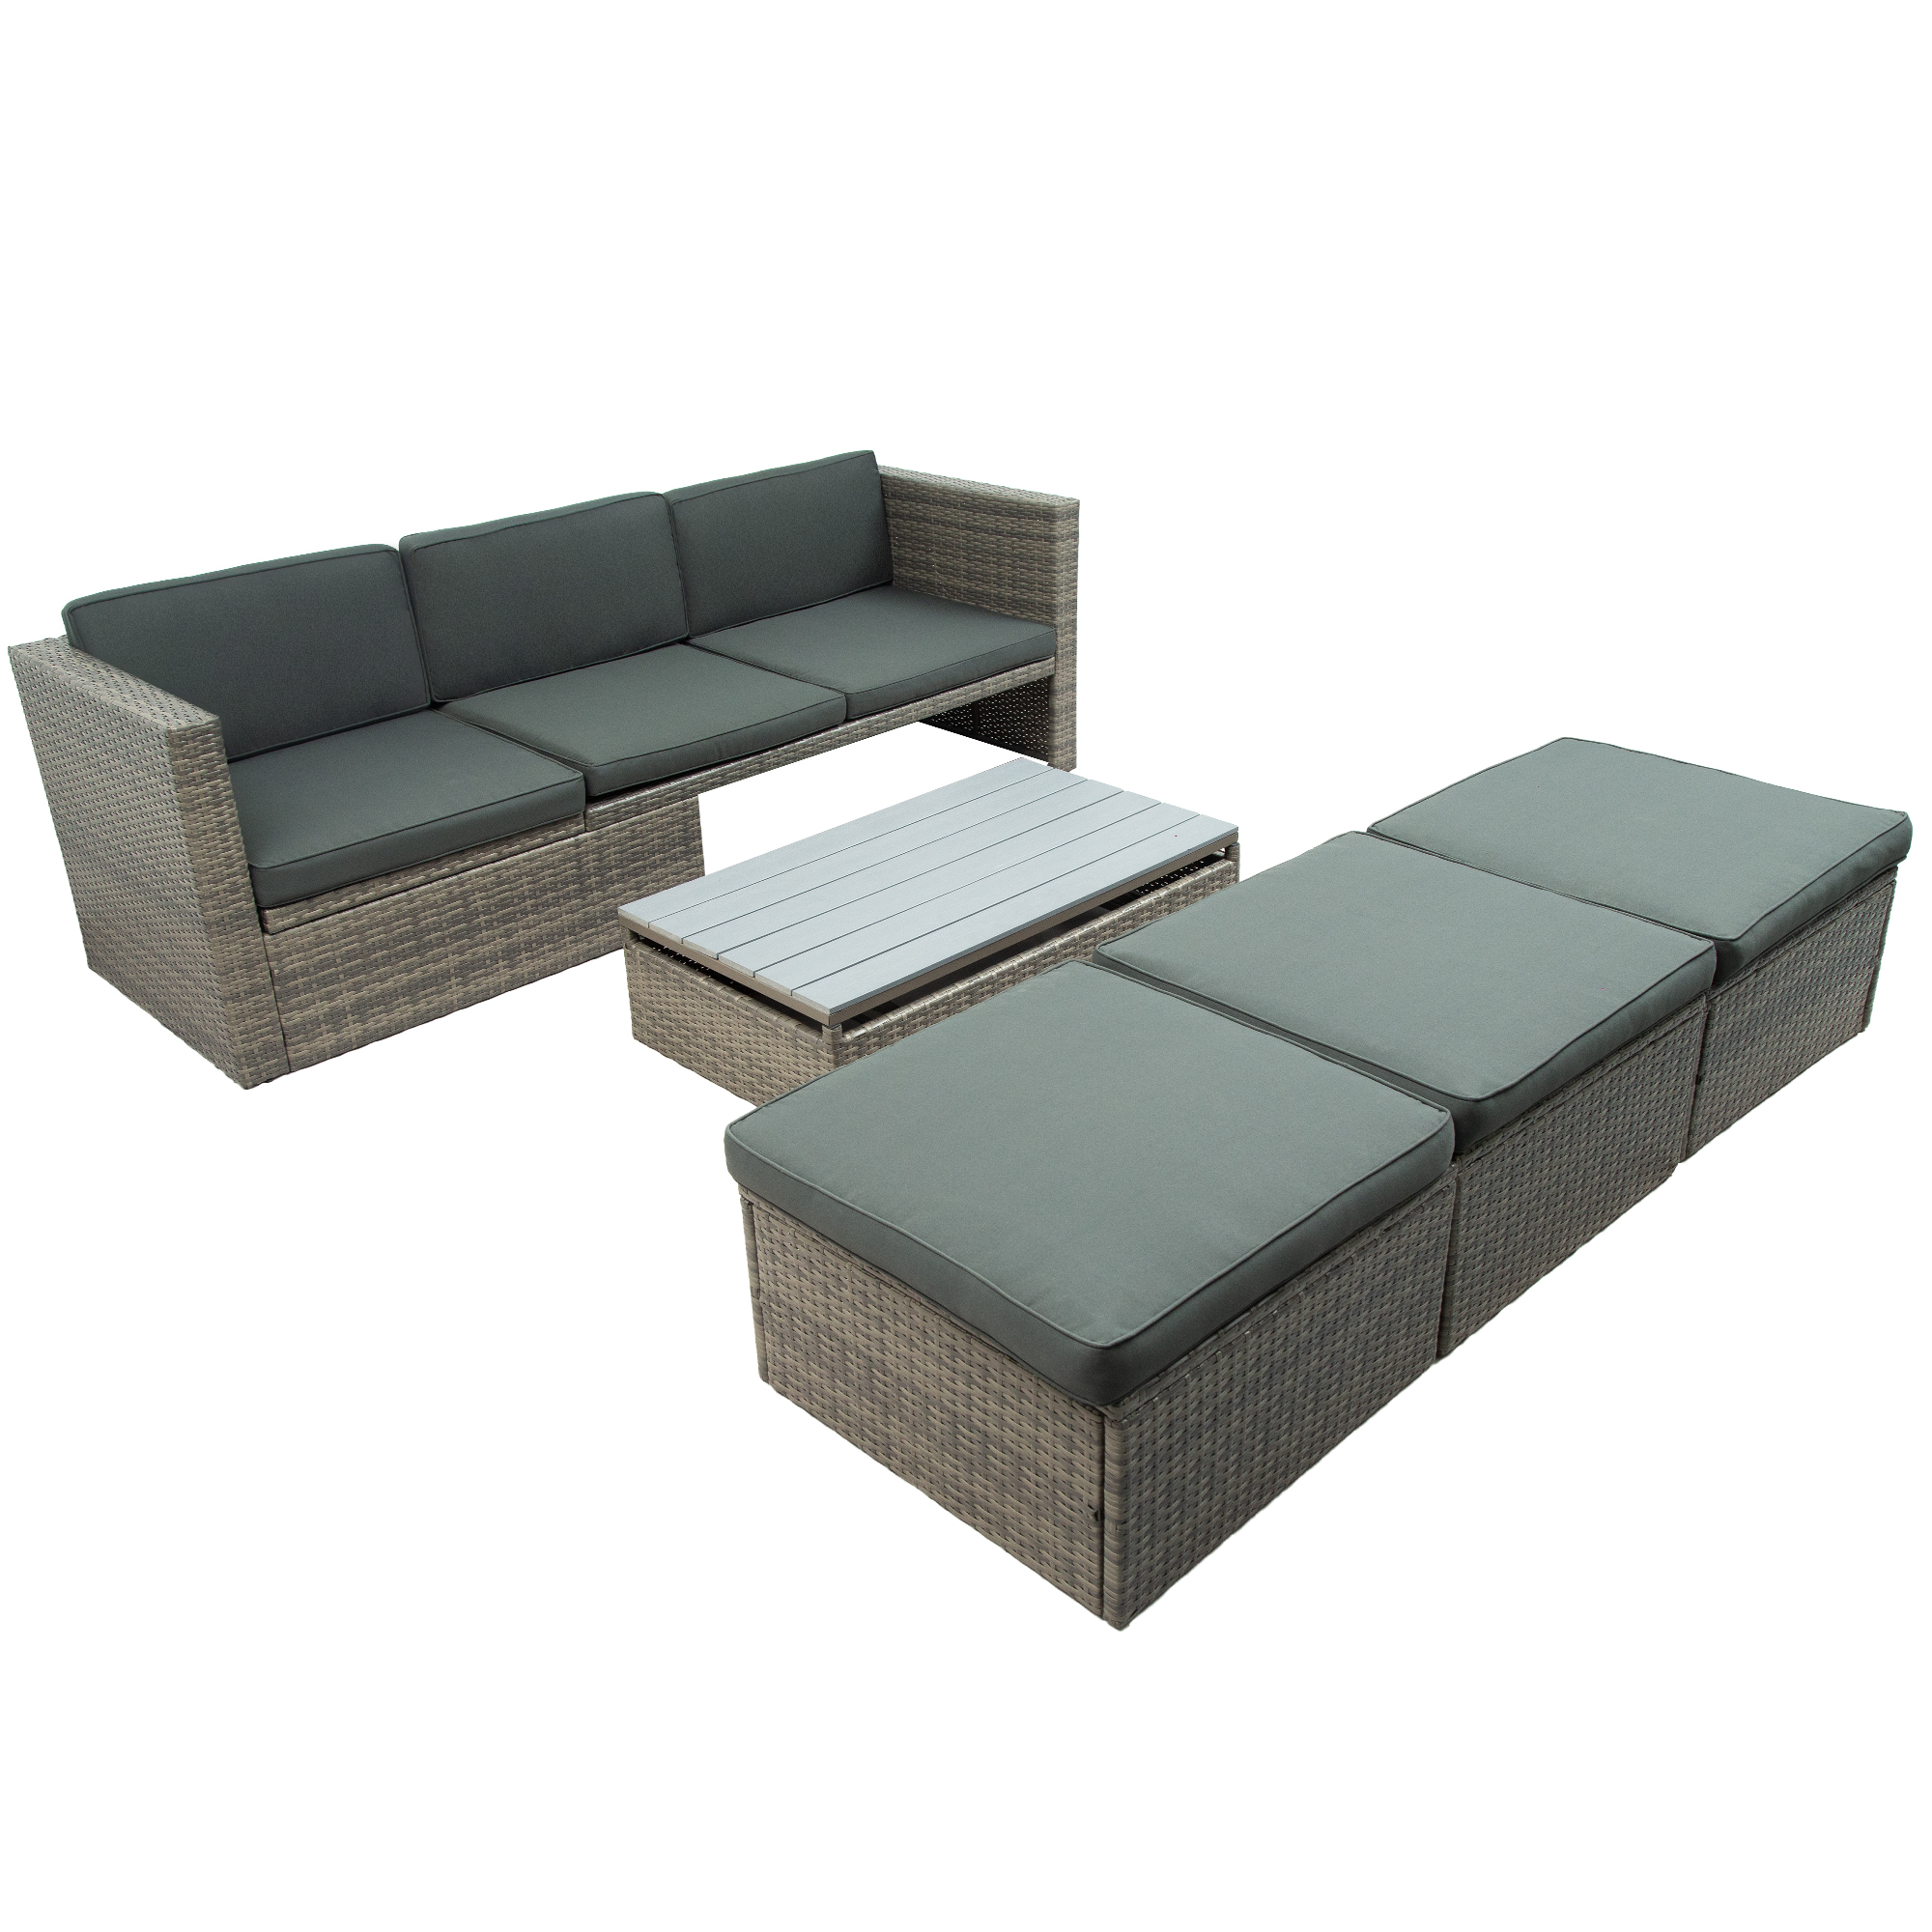 5-Piece Patio Wicker Sofa with Adustable Backrest, Cushions, Ottomans and Lift Top Coffee Table